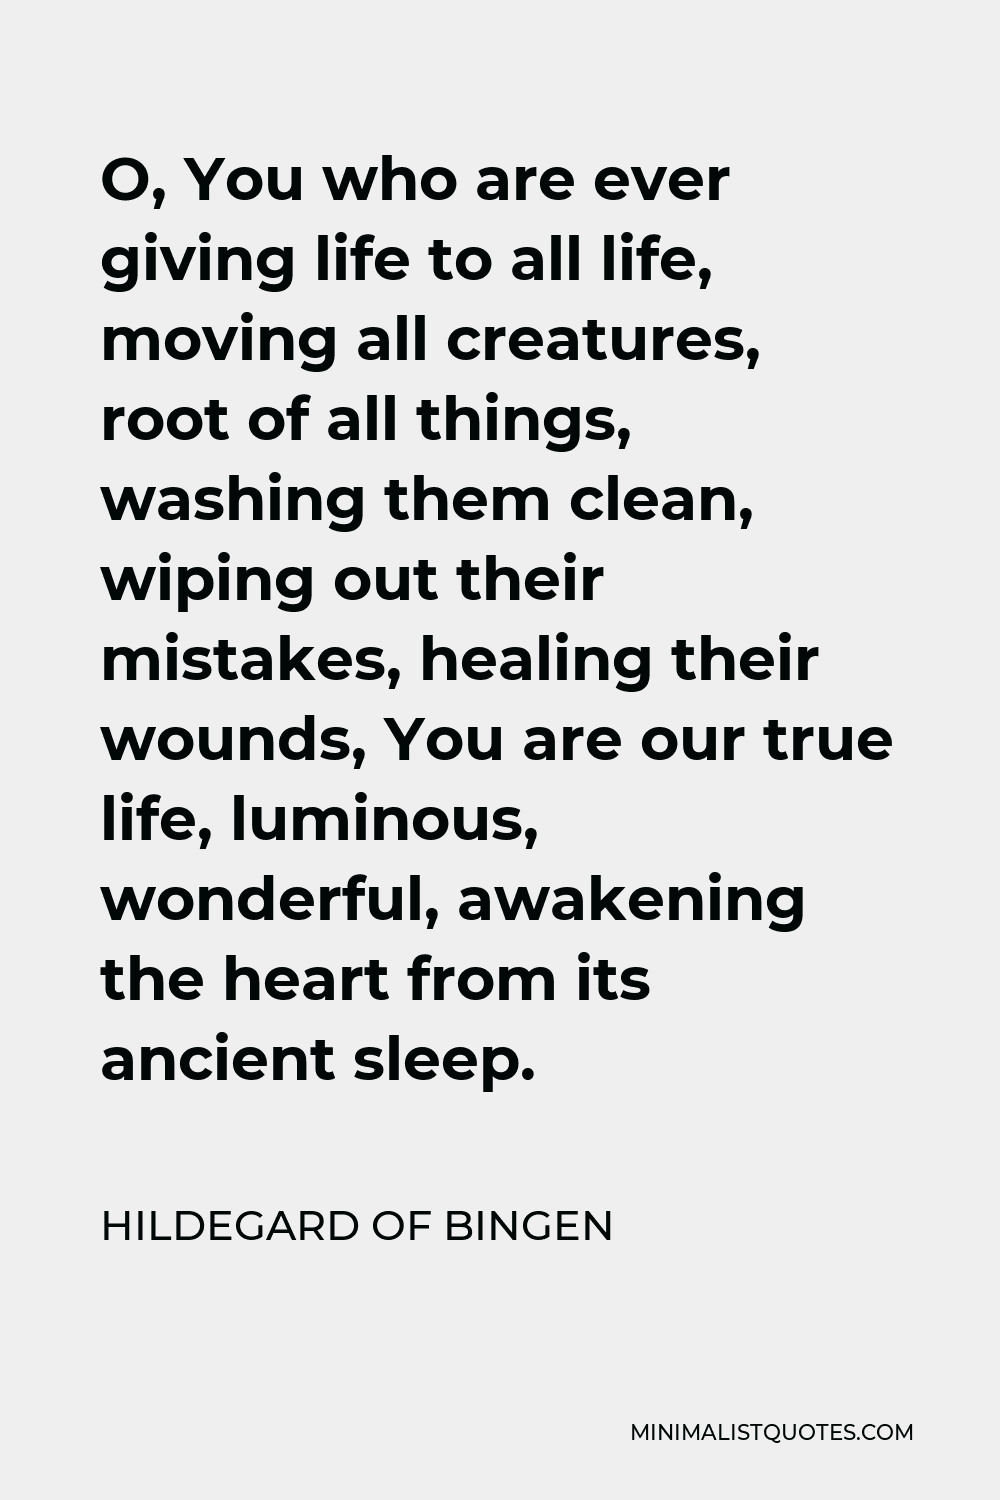 Hildegard of Bingen Quote - O, You who are ever giving life to all life, moving all creatures, root of all things, washing them clean, wiping out their mistakes, healing their wounds, You are our true life, luminous, wonderful, awakening the heart from its ancient sleep.